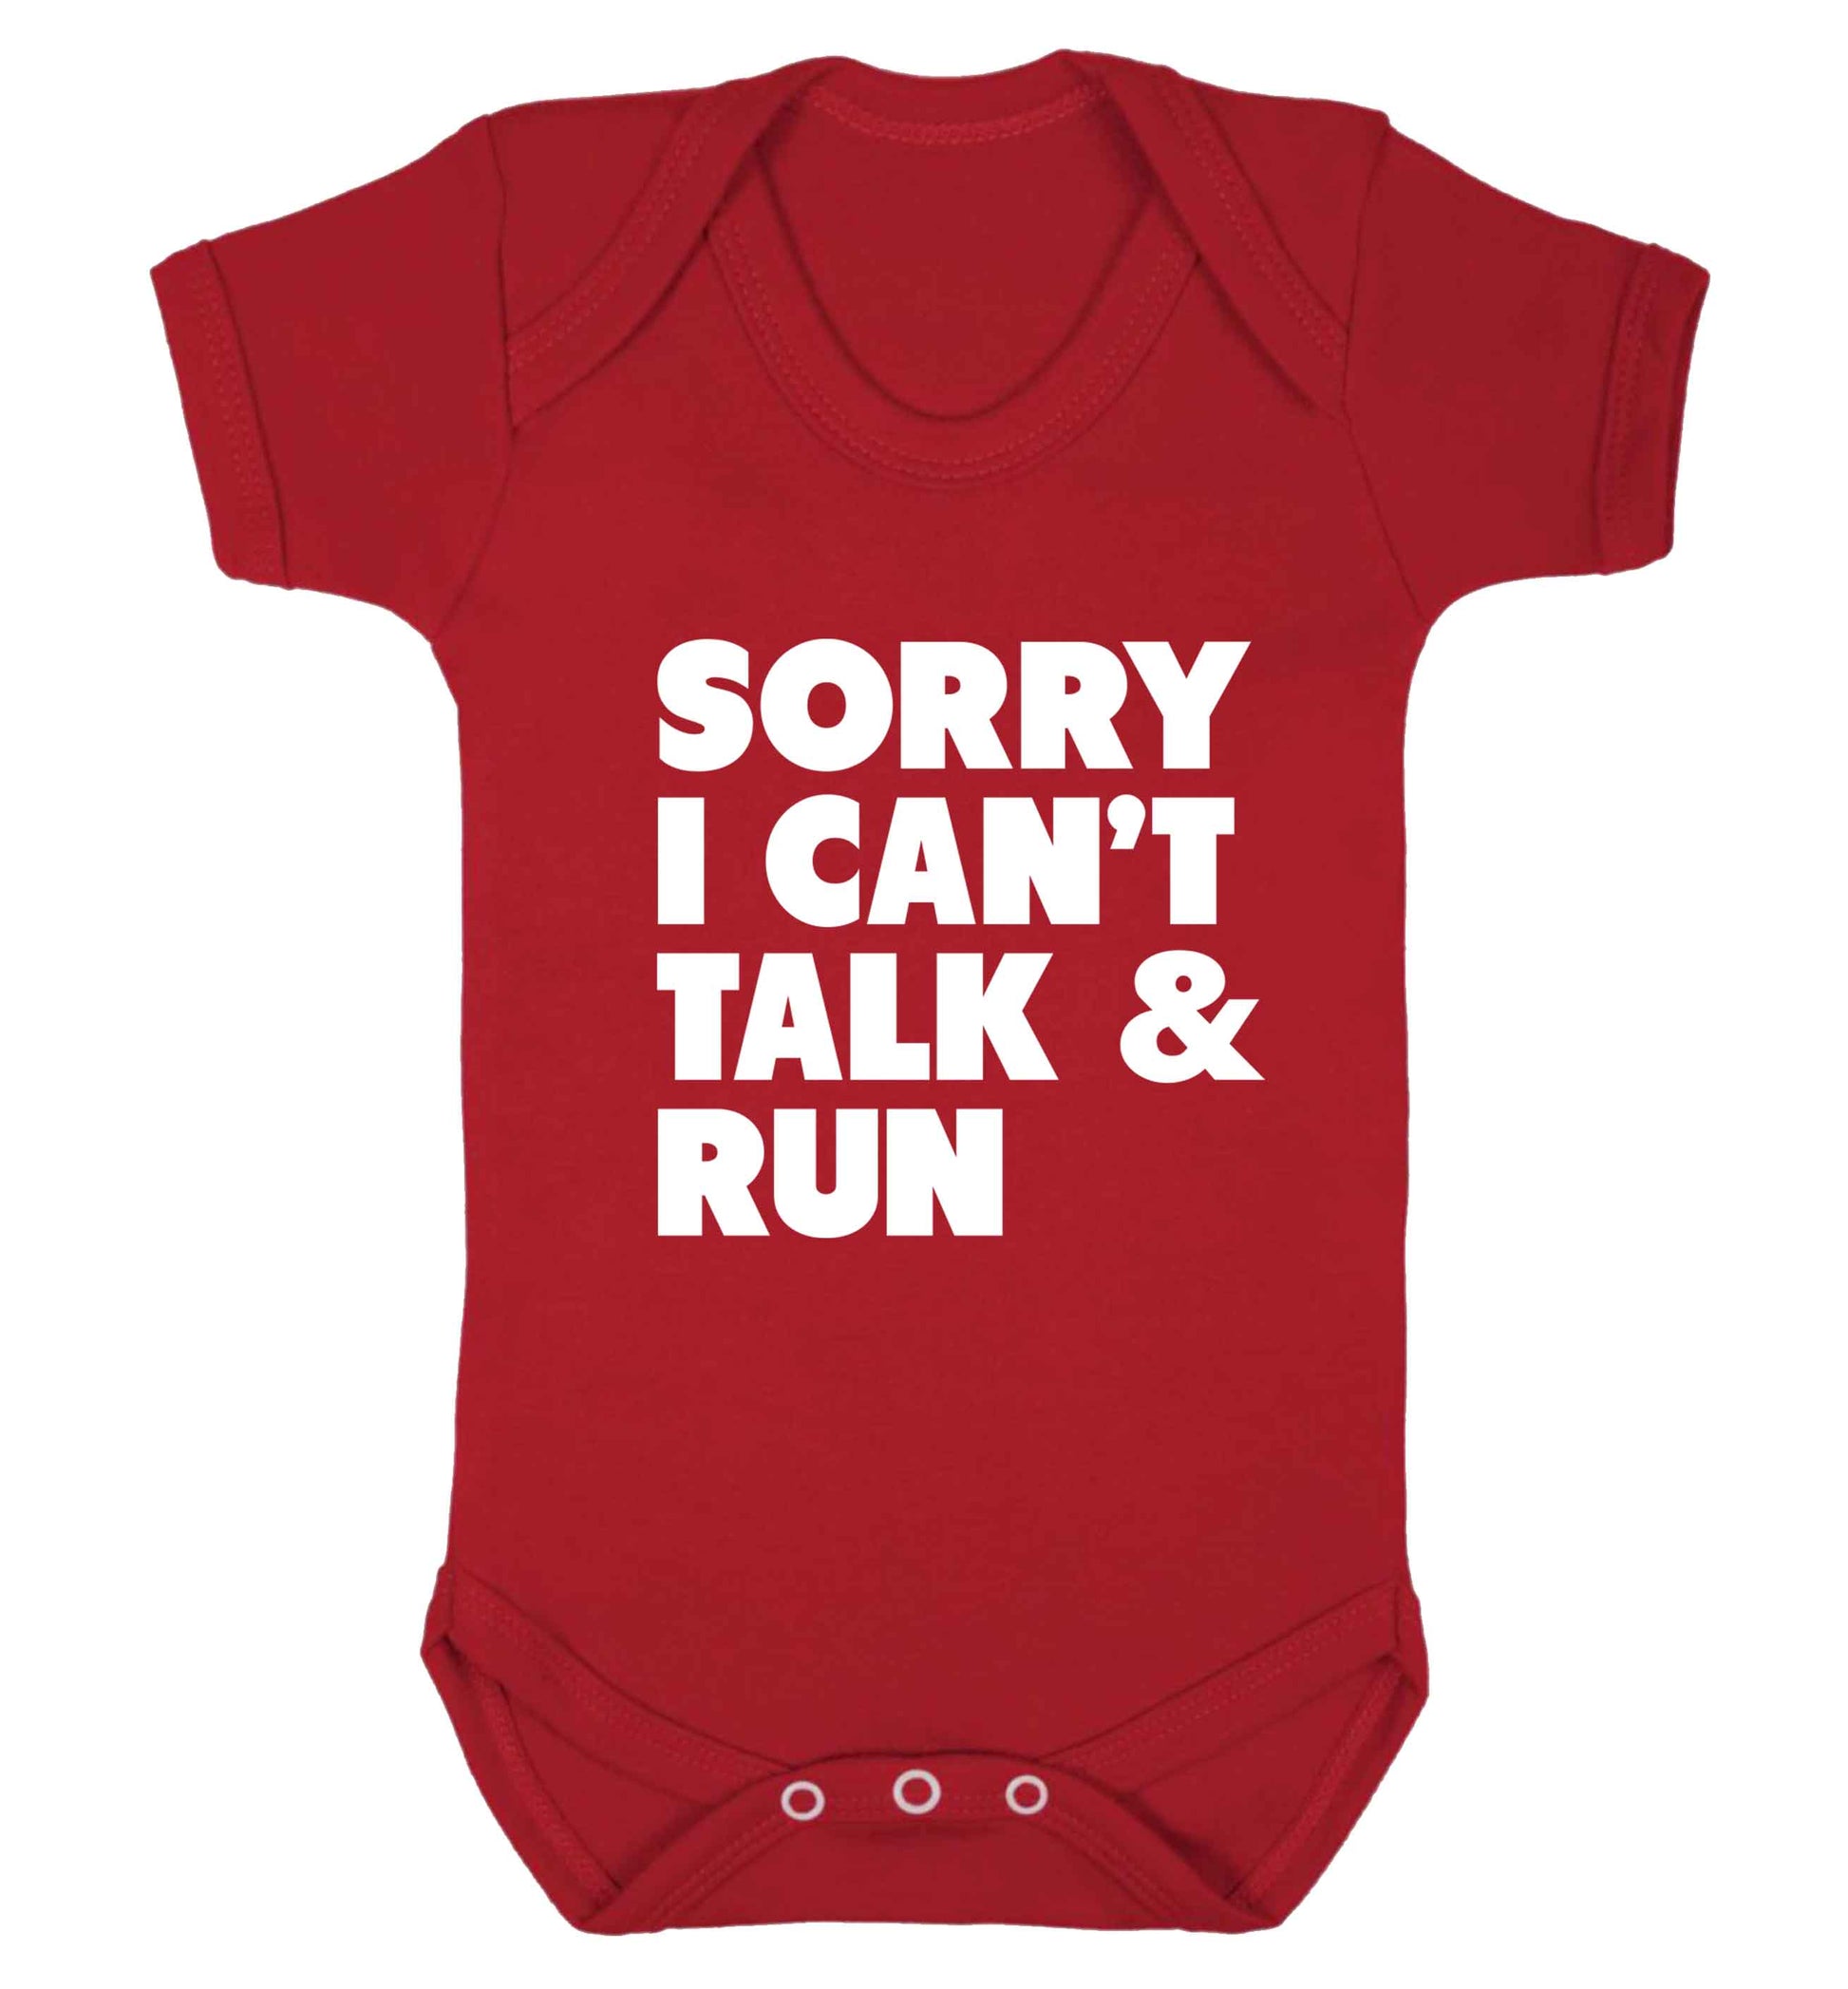 Sorry I can't talk and run baby vest red 18-24 months